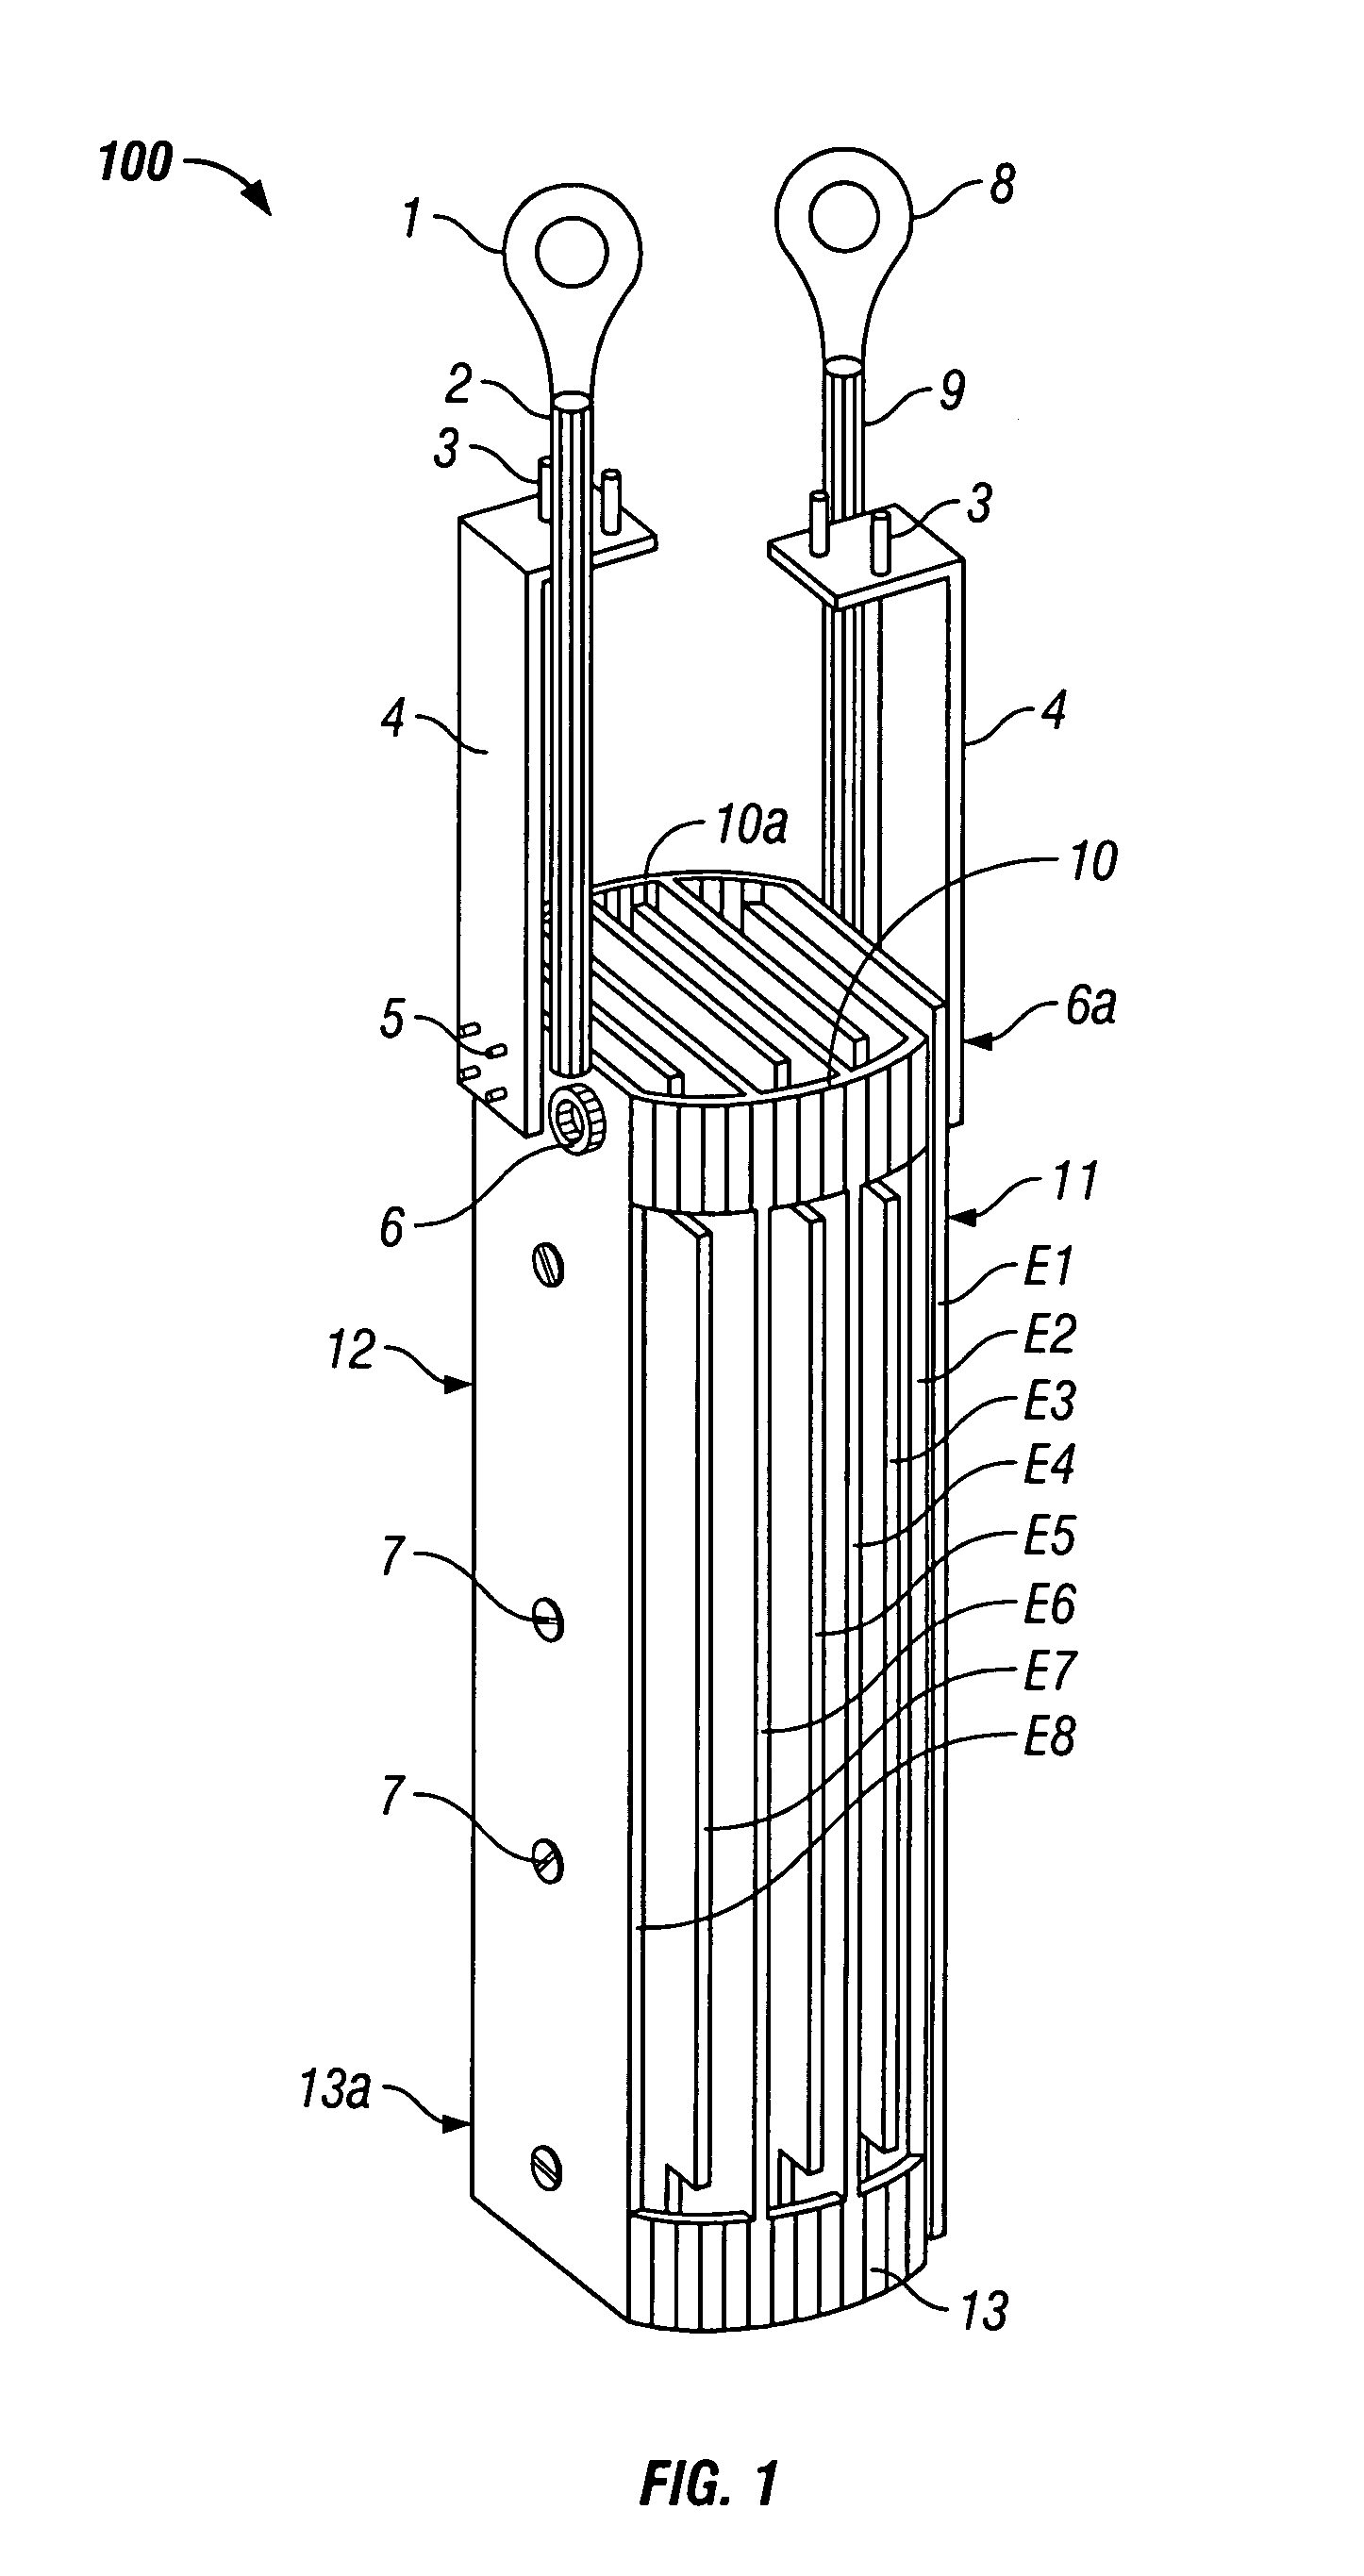 Cells and electrodes for electrocoagulation treatment of wastewater